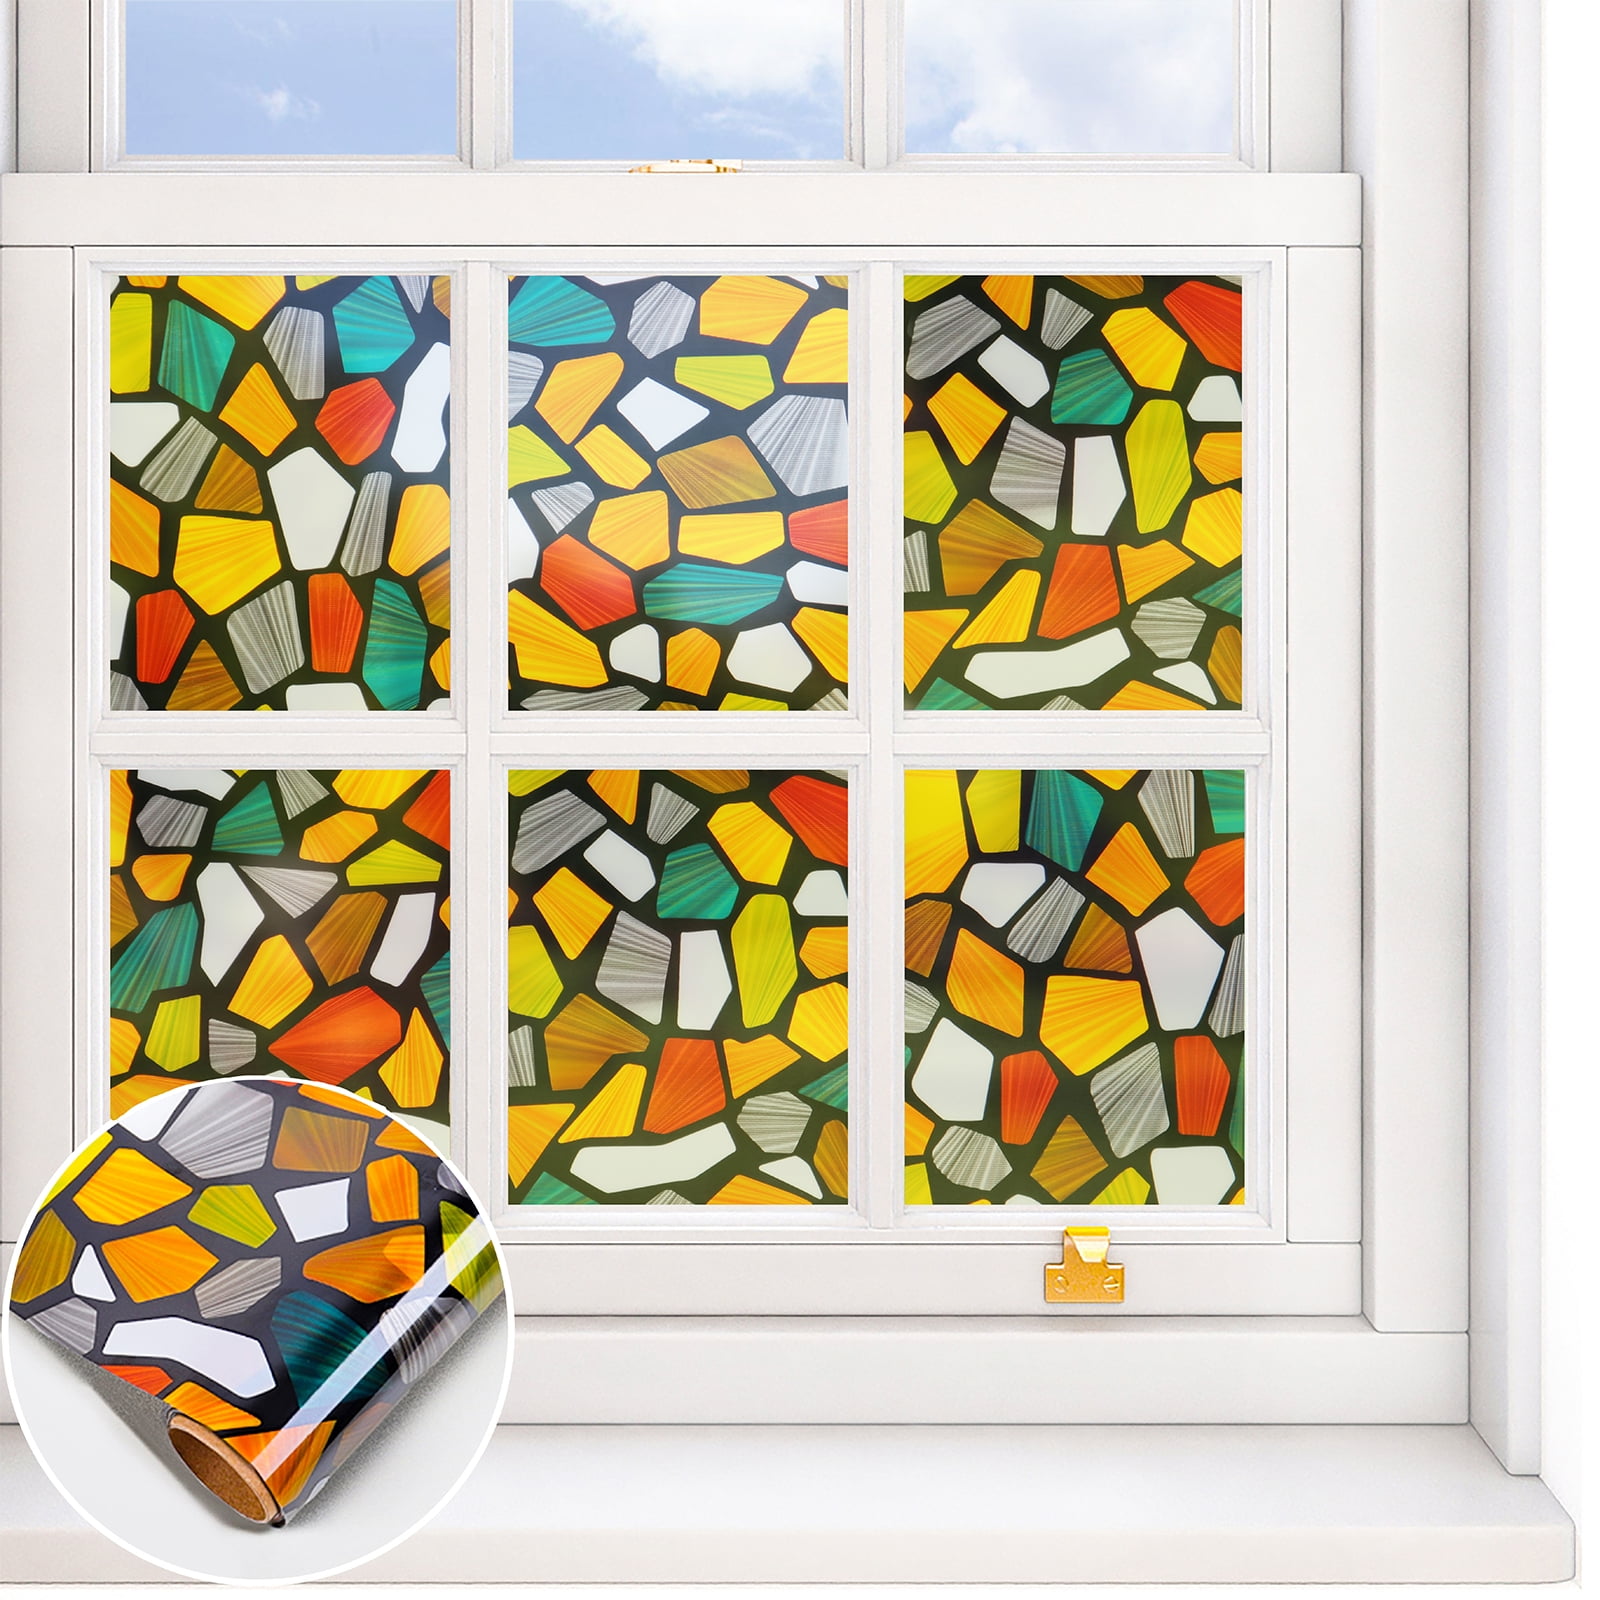 Details about   Privacy Window Film Stained Glass Non Adhesive Frosted Cling Home Decoratives 